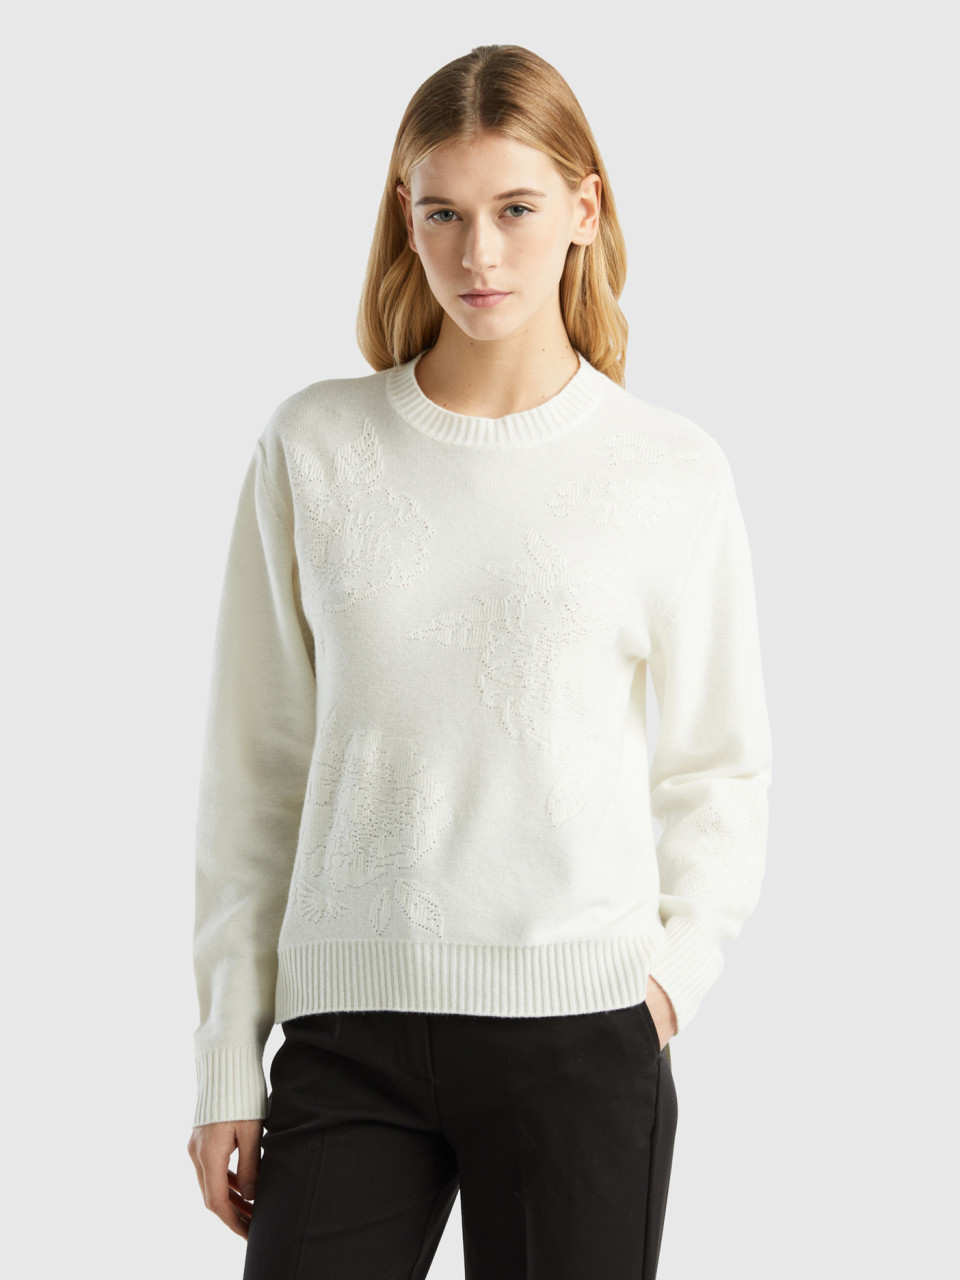 Benetton, Cashmere Blend Sweater With Floral Designs, Creamy White, Women